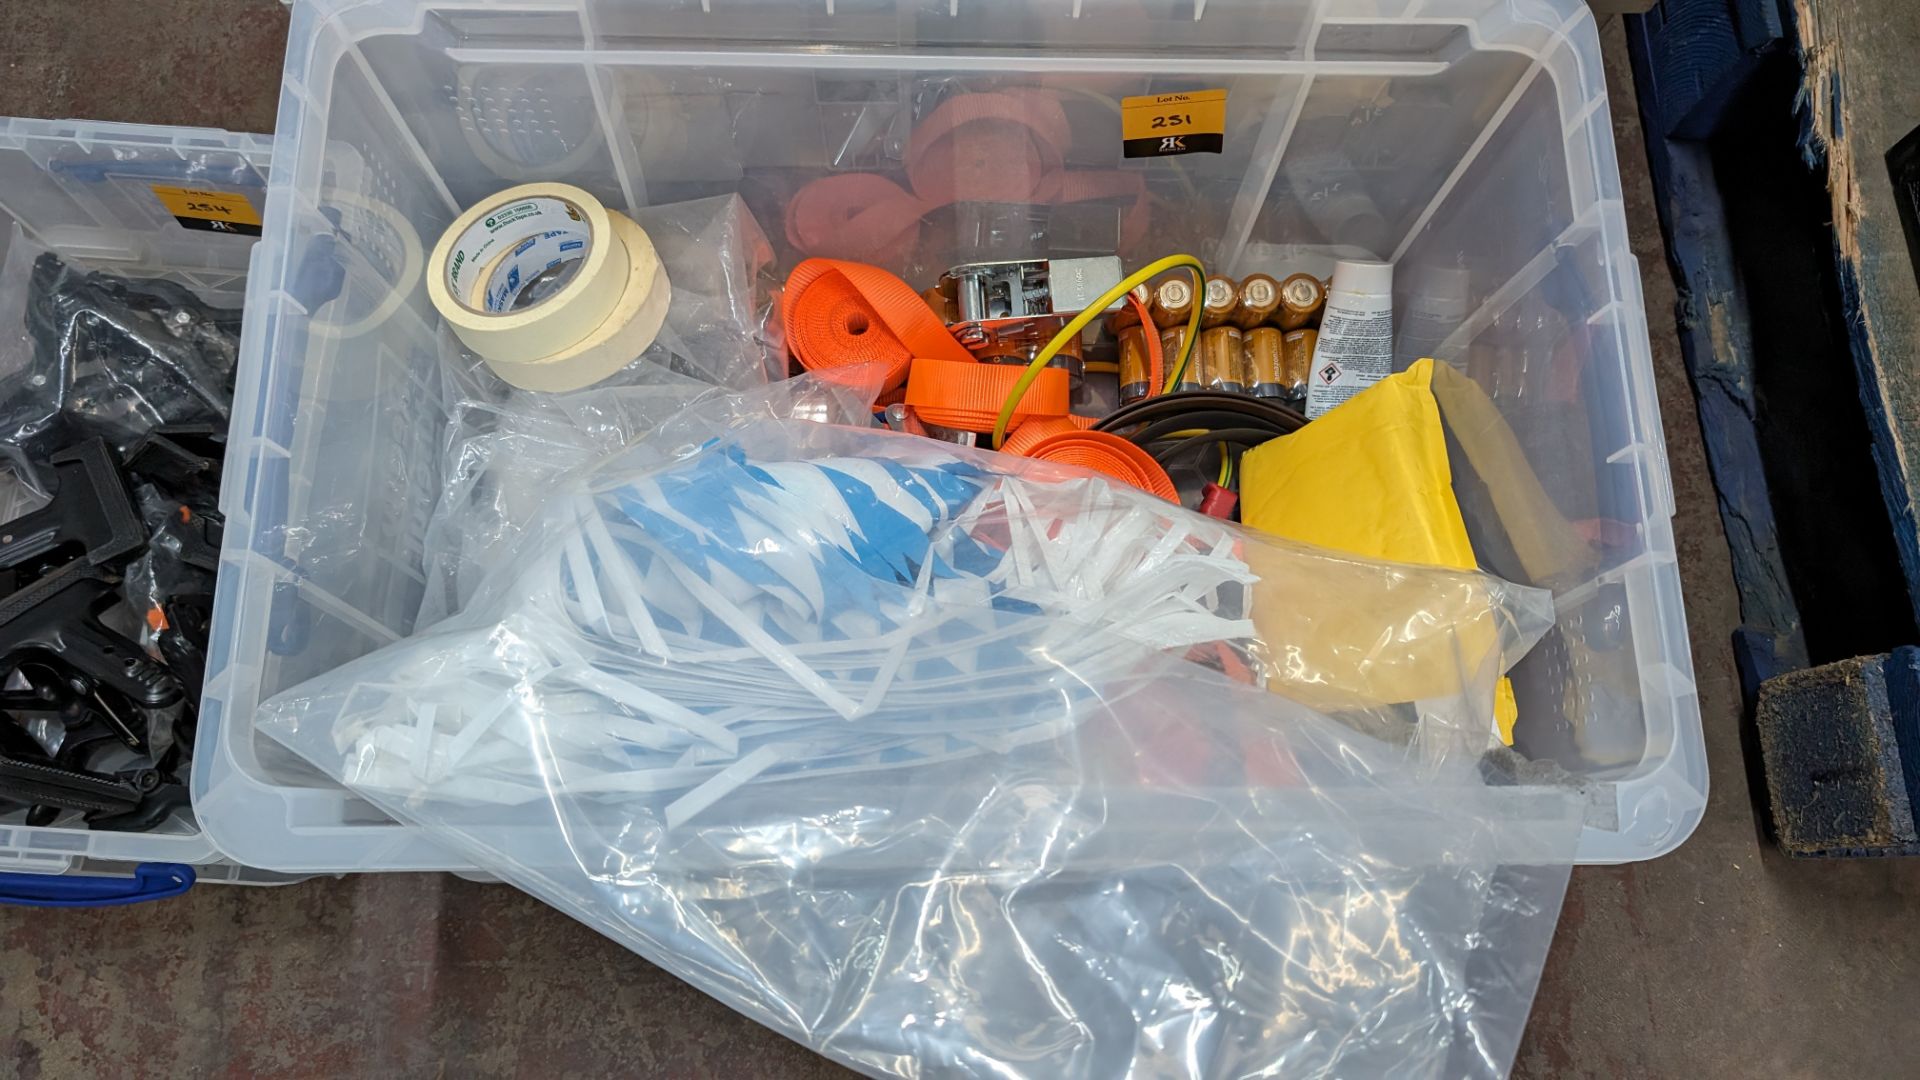 The contents of a crate of hardware and miscellaneous